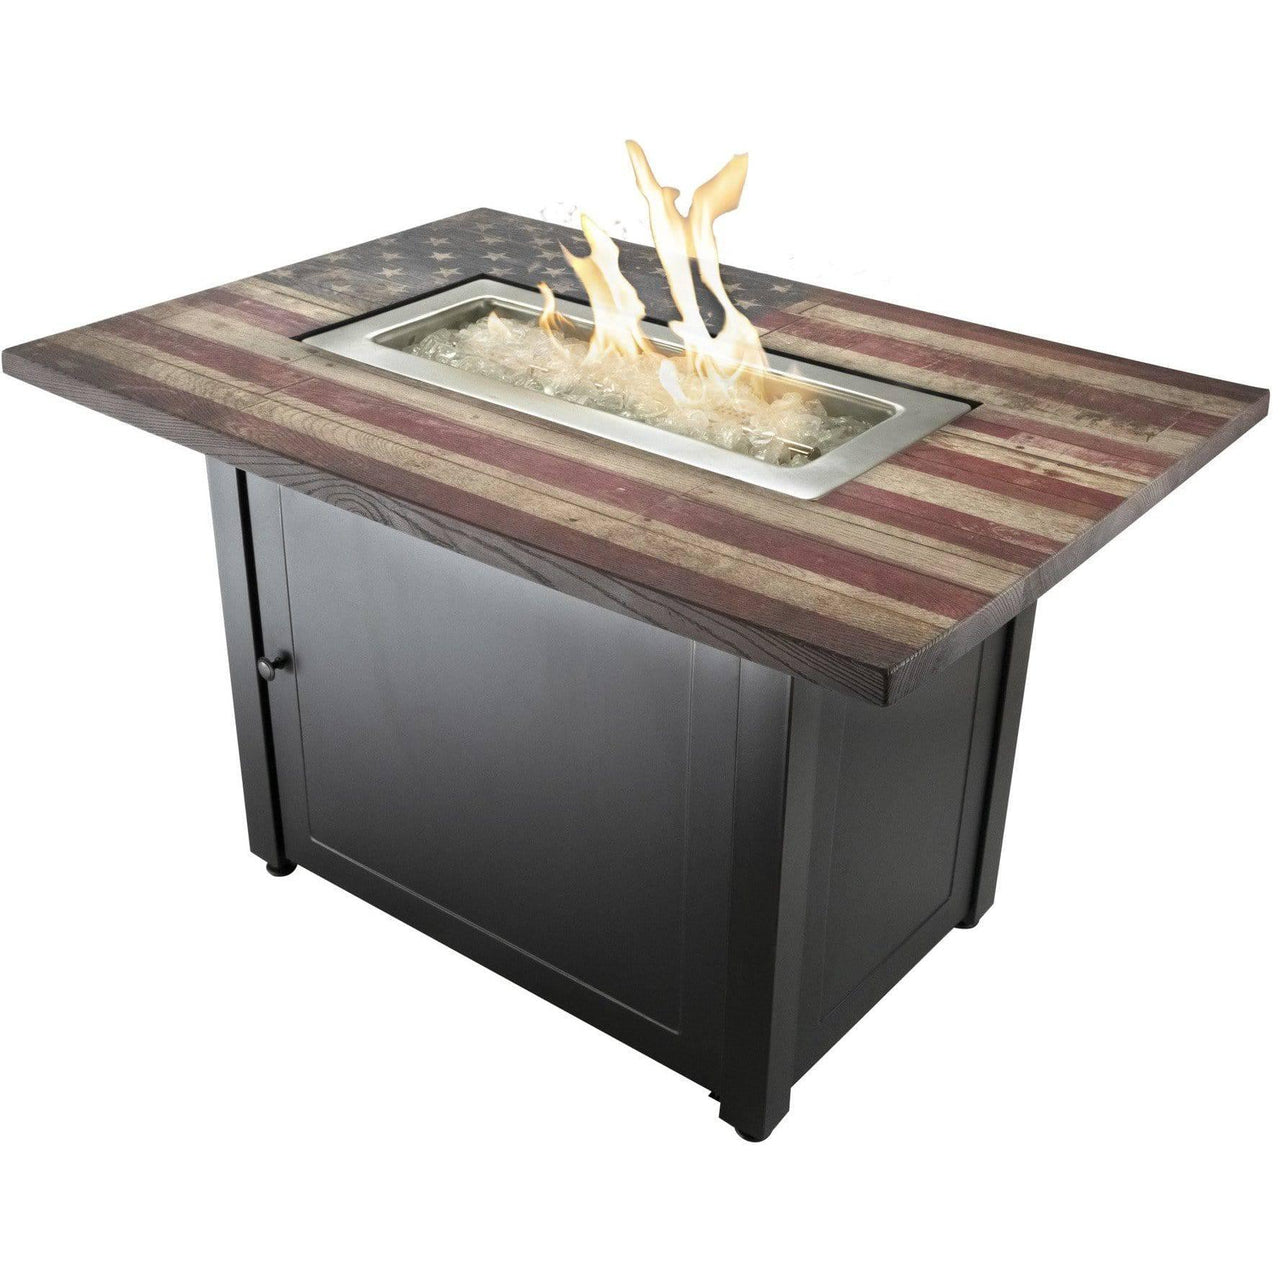 Endless Summer The Americana, 40 x 28 Rectangular Gas Outdoor Fire Pit - GAD17108ES - Fire Pit Stock